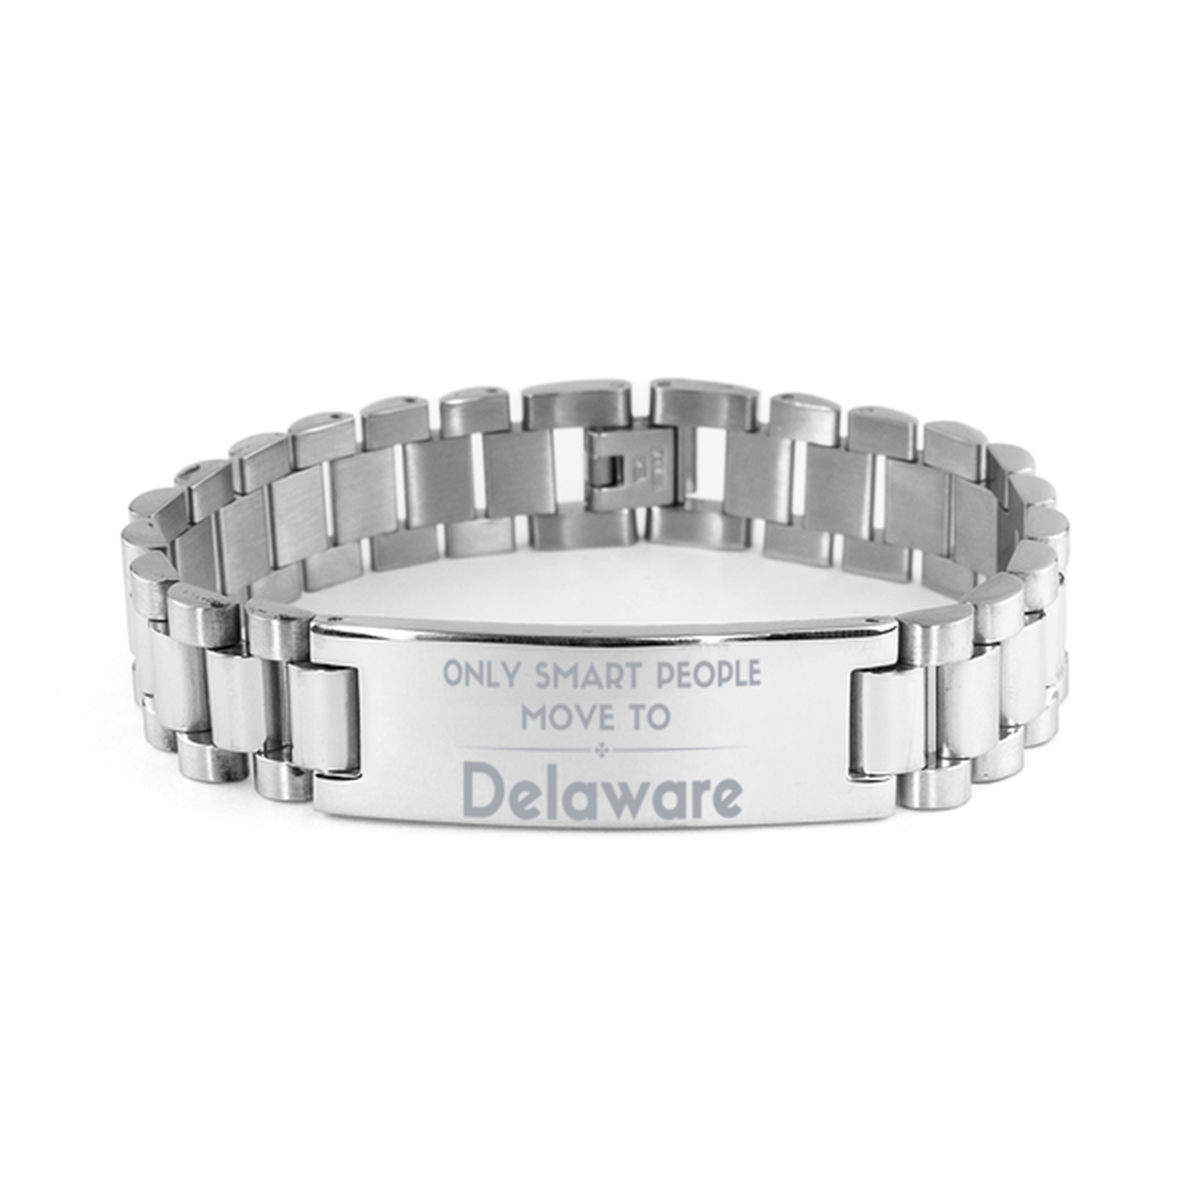 Only smart people move to Delaware Ladder Stainless Steel Bracelet, Gag Gifts For Delaware, Move to Delaware Gifts for Friends Coworker Funny Saying Quote